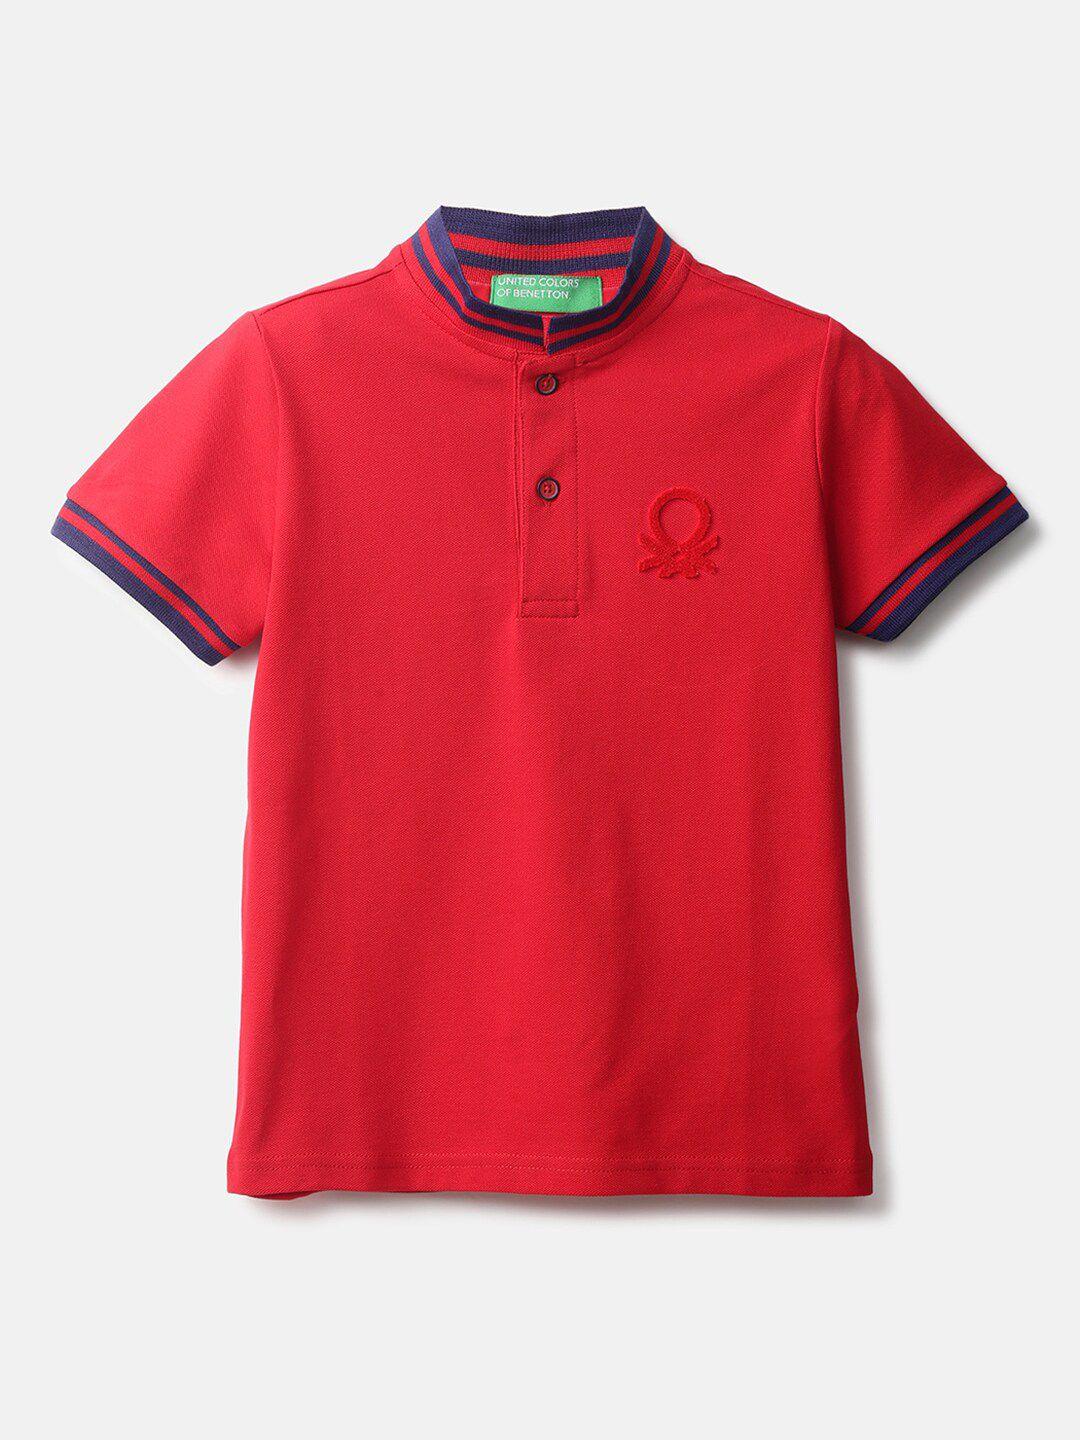 united-colors-of-benetton-boys-red-&-blue-henley-neck-t-shirt